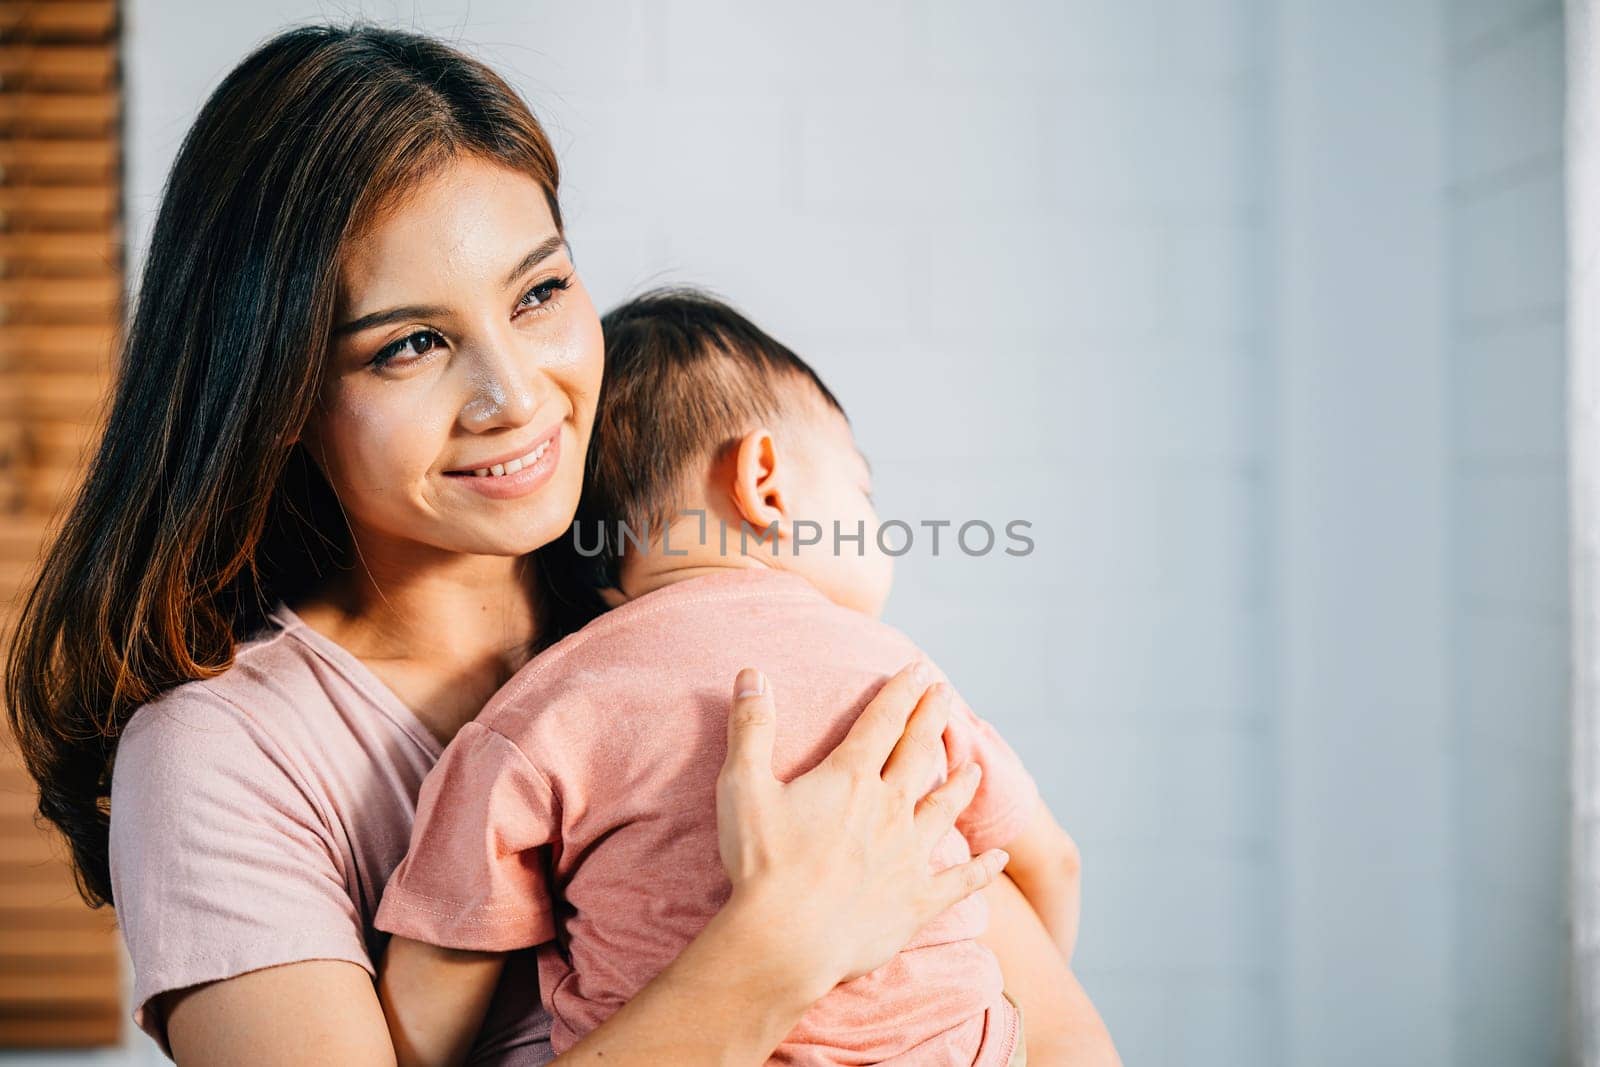 A biracial mother holds her peacefully sleeping newborn in a close and affectionate embrace sharing a tender family moment filled with joy and the beauty of new motherhood.